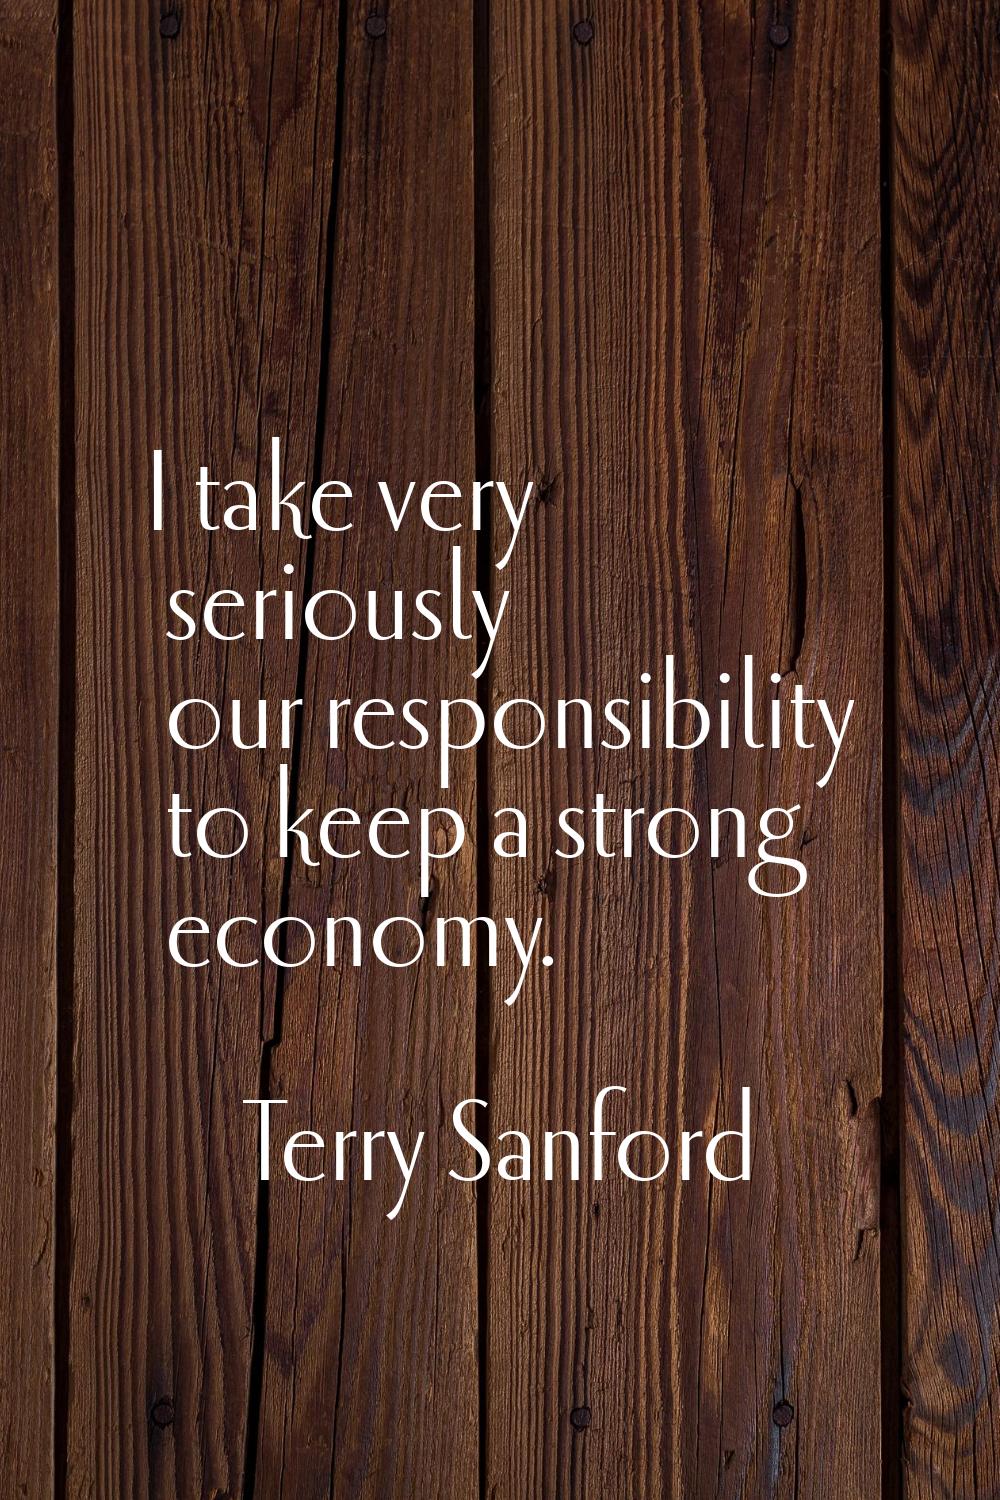 I take very seriously our responsibility to keep a strong economy.